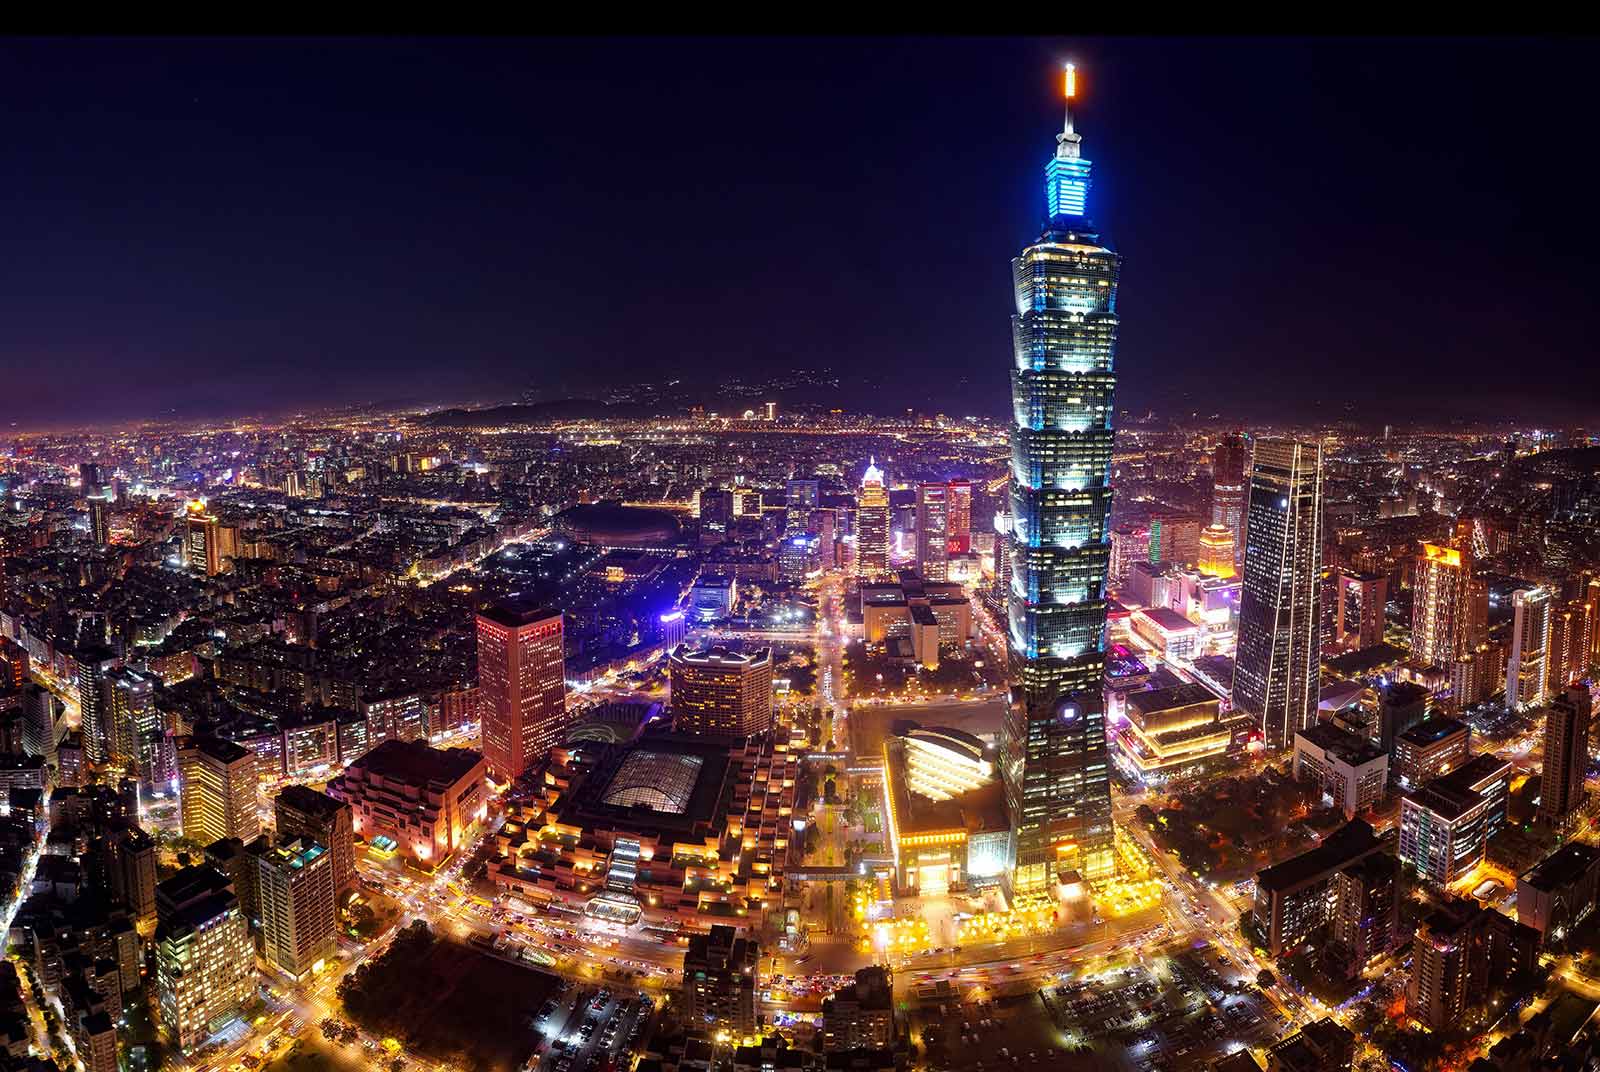 Taiwan can be East Asia’s new internet and data hub